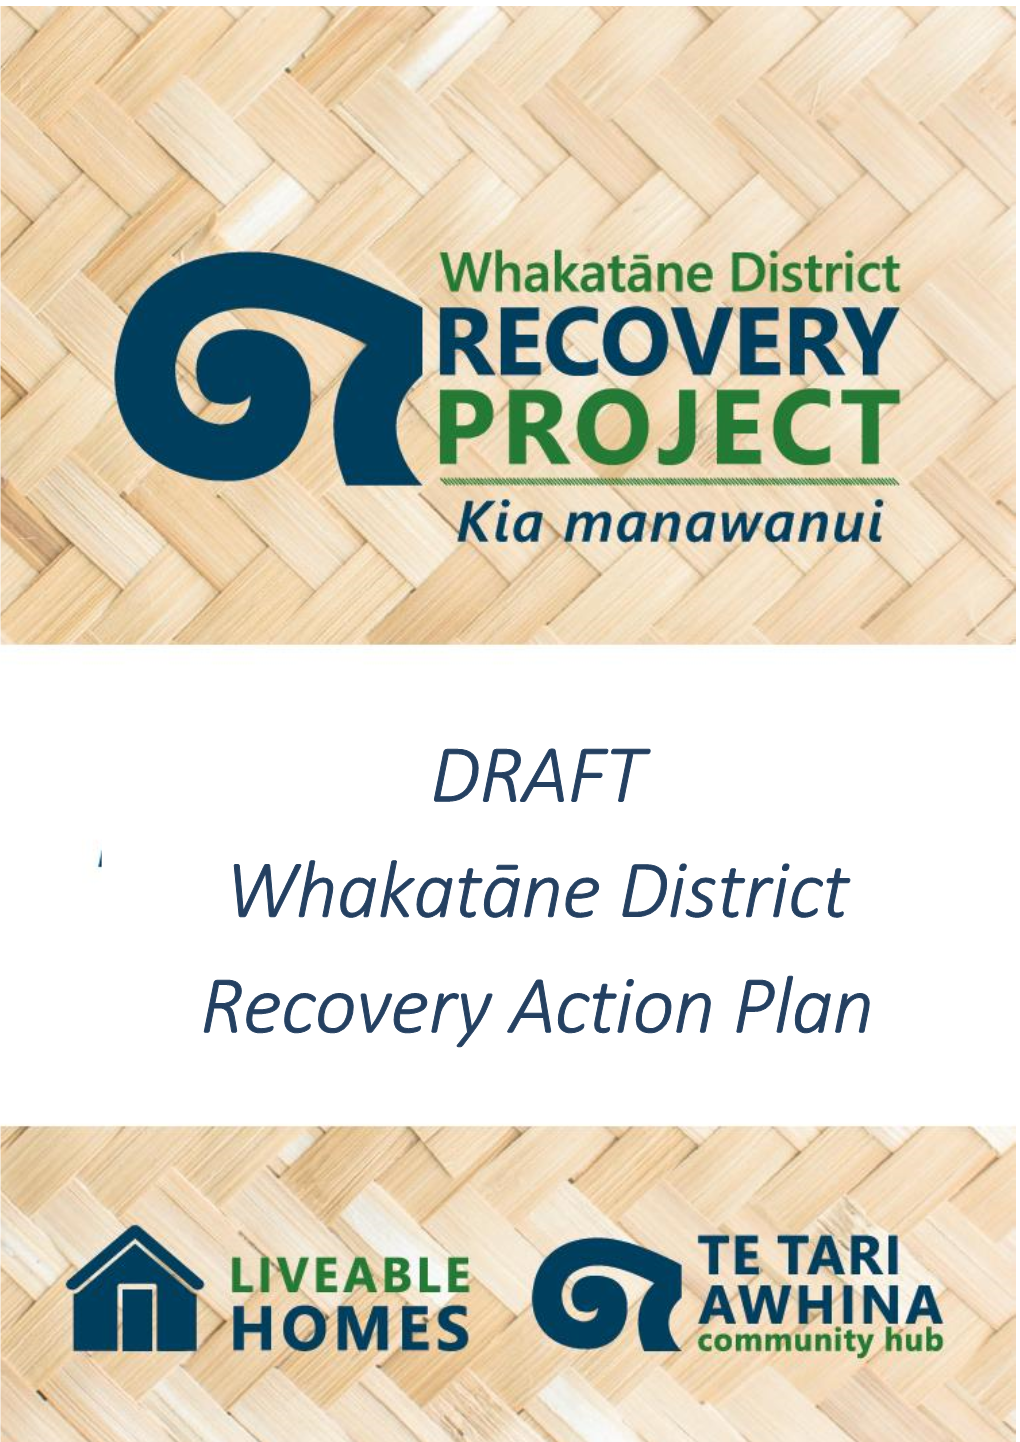 DRAFT Whakatāne District Recovery Action Plan